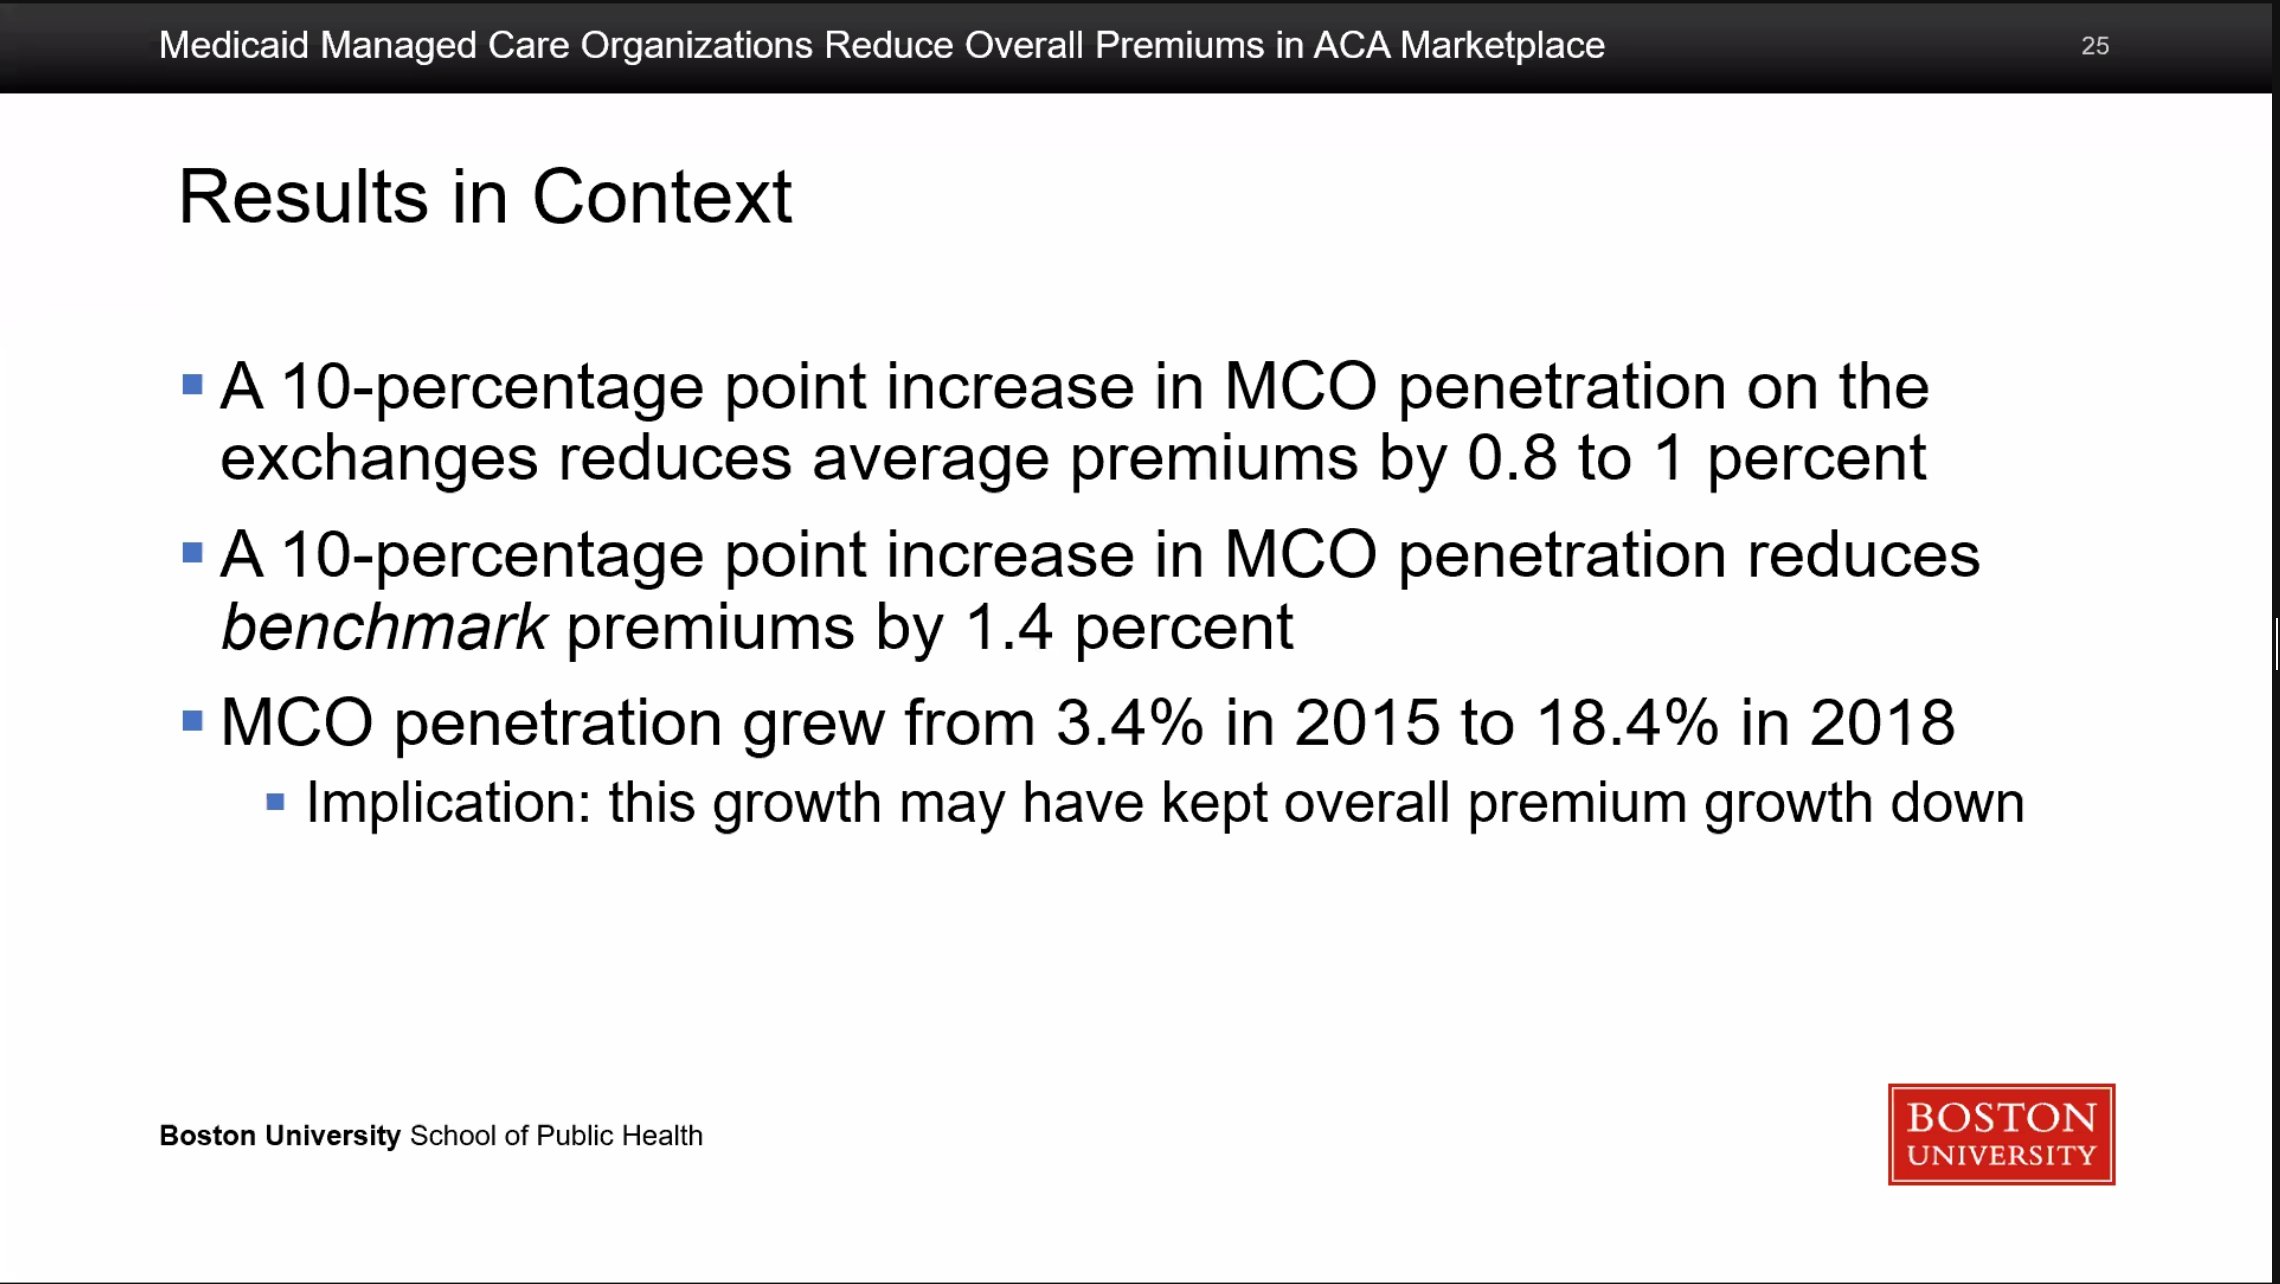 Impact of MMC entry on Premiums in the ACA